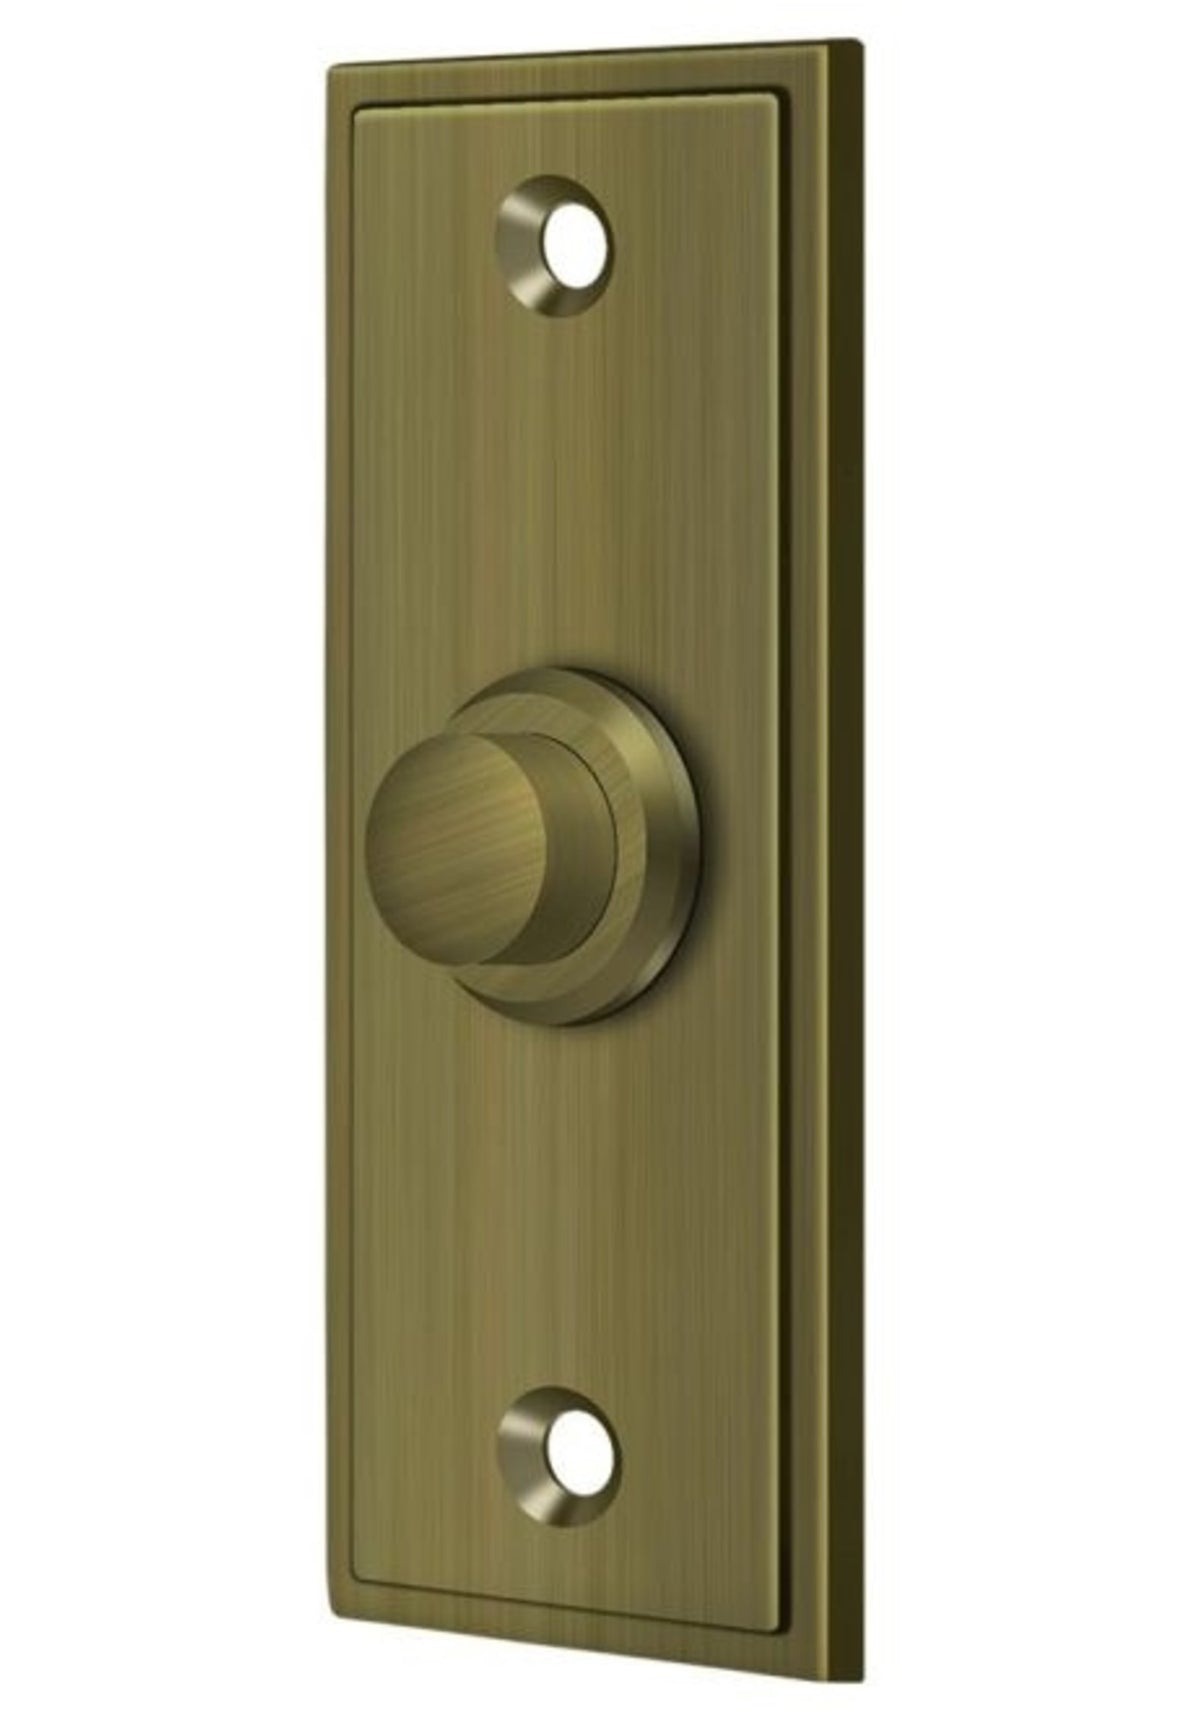 buy doorbell buttons at cheap rate in bulk. wholesale & retail electrical repair kits store. home décor ideas, maintenance, repair replacement parts